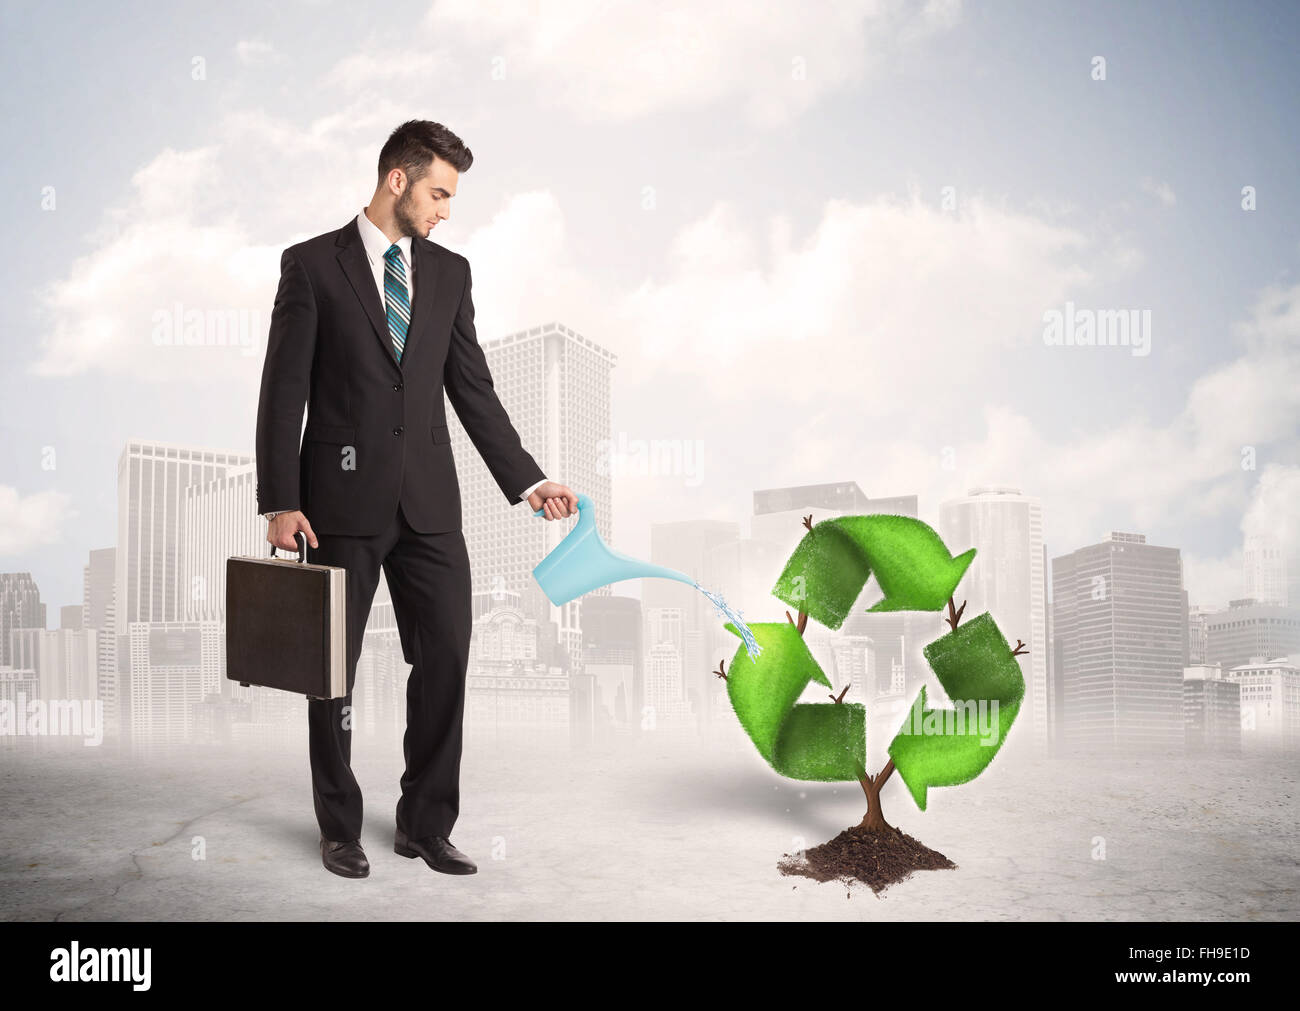 Business man watering green recycle sign tree on city background Stock Photo